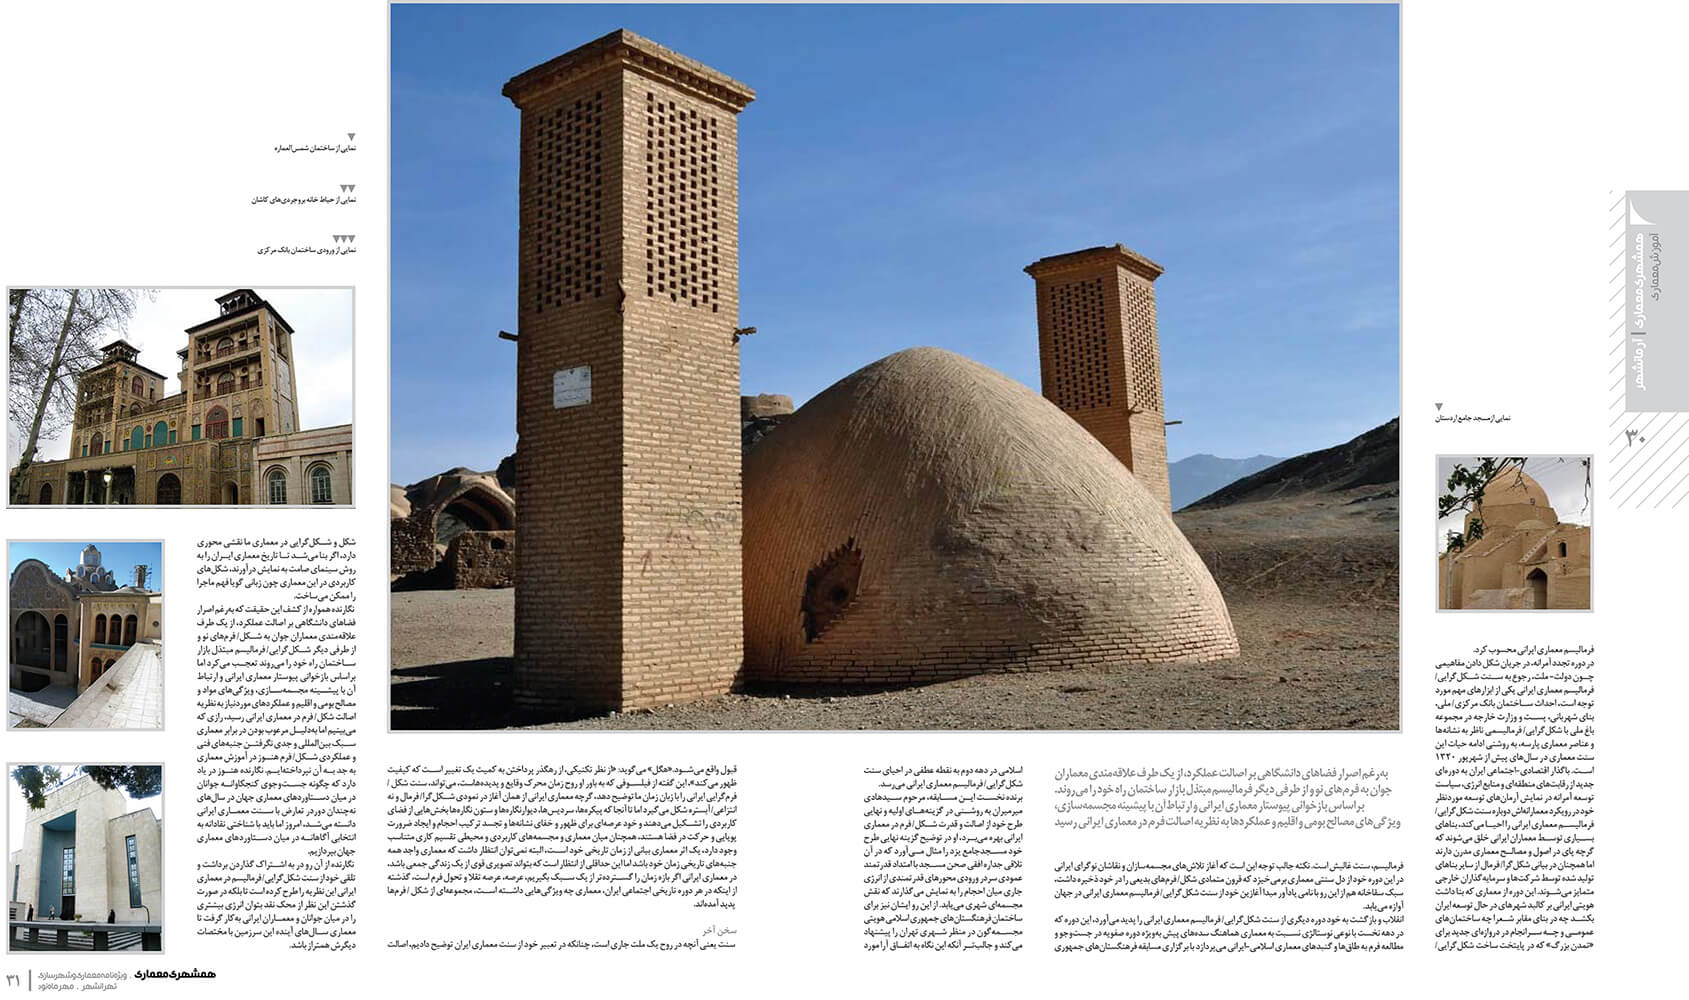 picture no. 4 of publication: Formalism The Mystery of Iranian Architecture, author: Kambiz Moshtaq